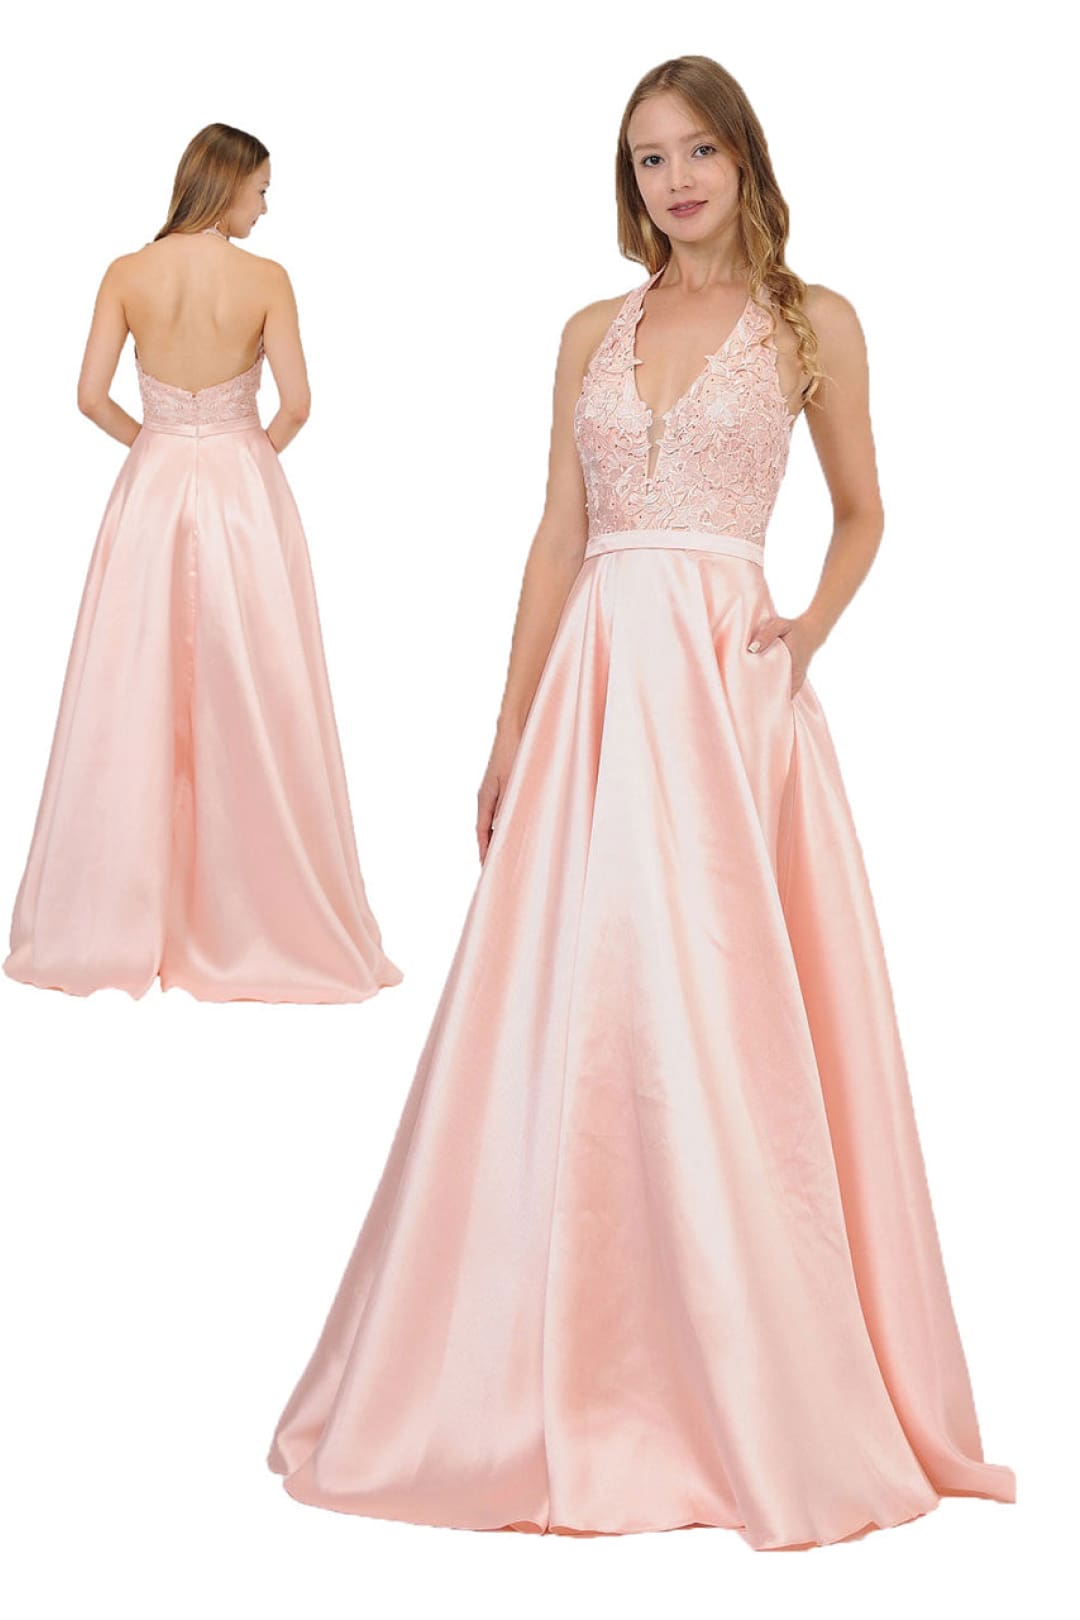 POLY USA 8316 Floral Lace Halter Prom Mikado A-line Evening Gown - BLUSH / XS Dress